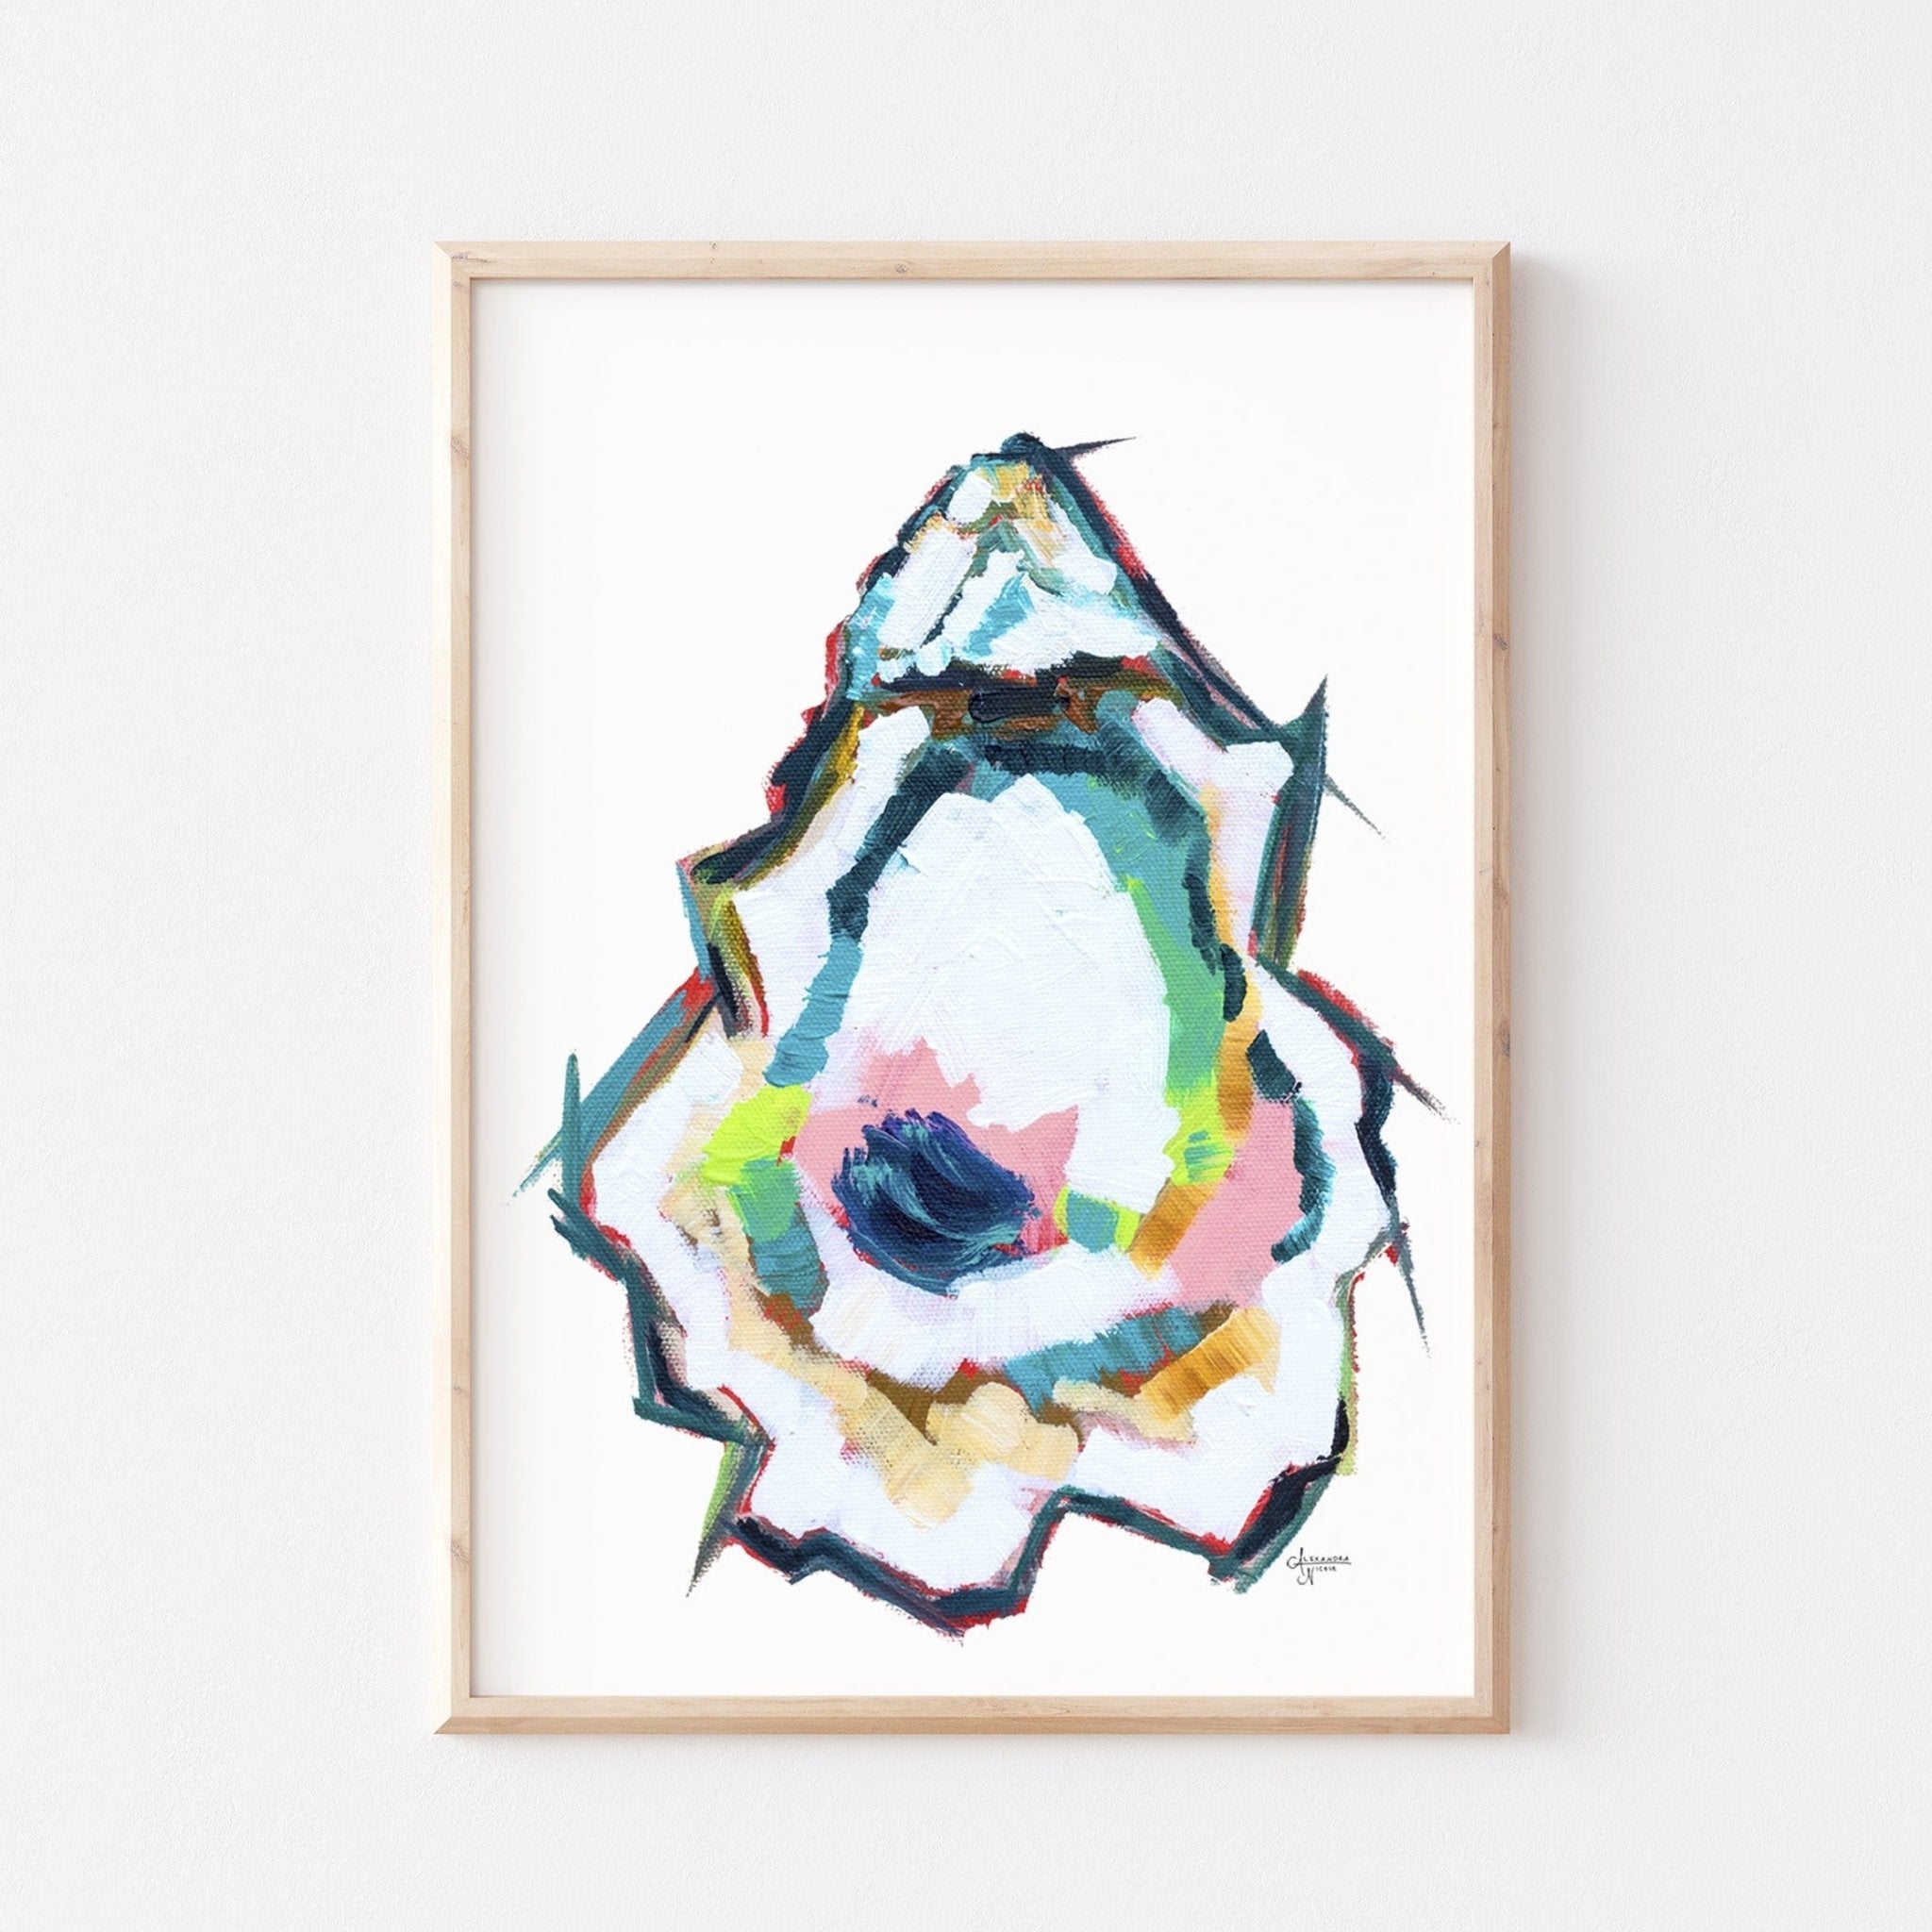 abstract shell paintings